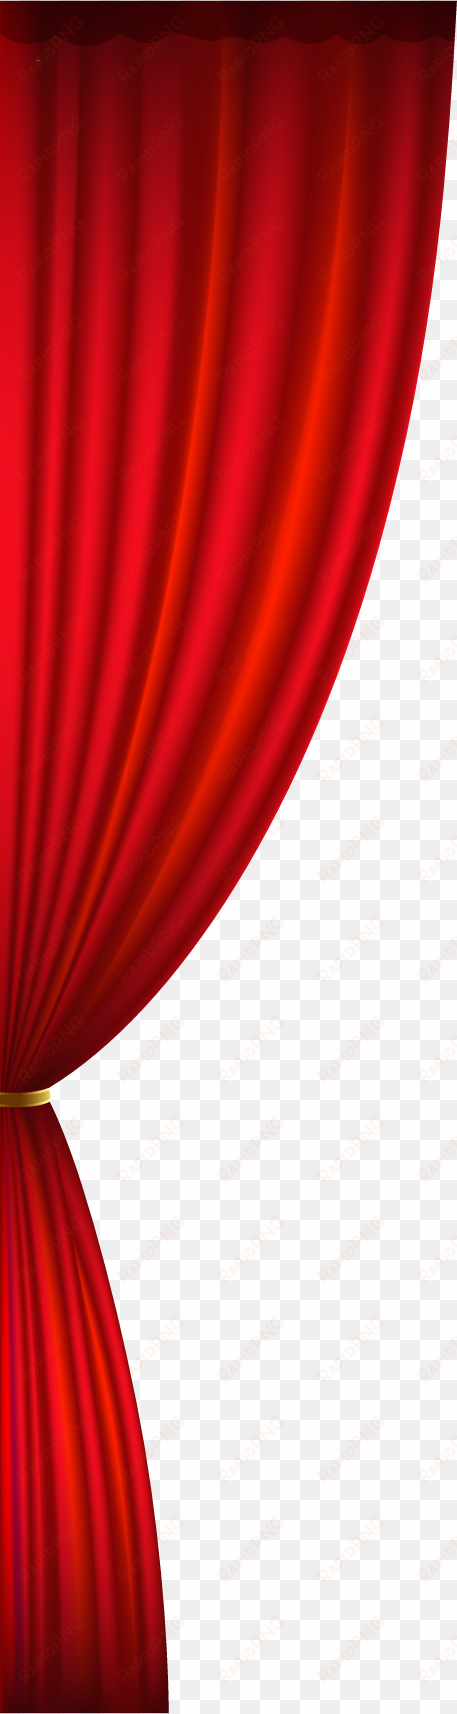 red stage curtain png clipart freeuse stock - half stage curtain transparent